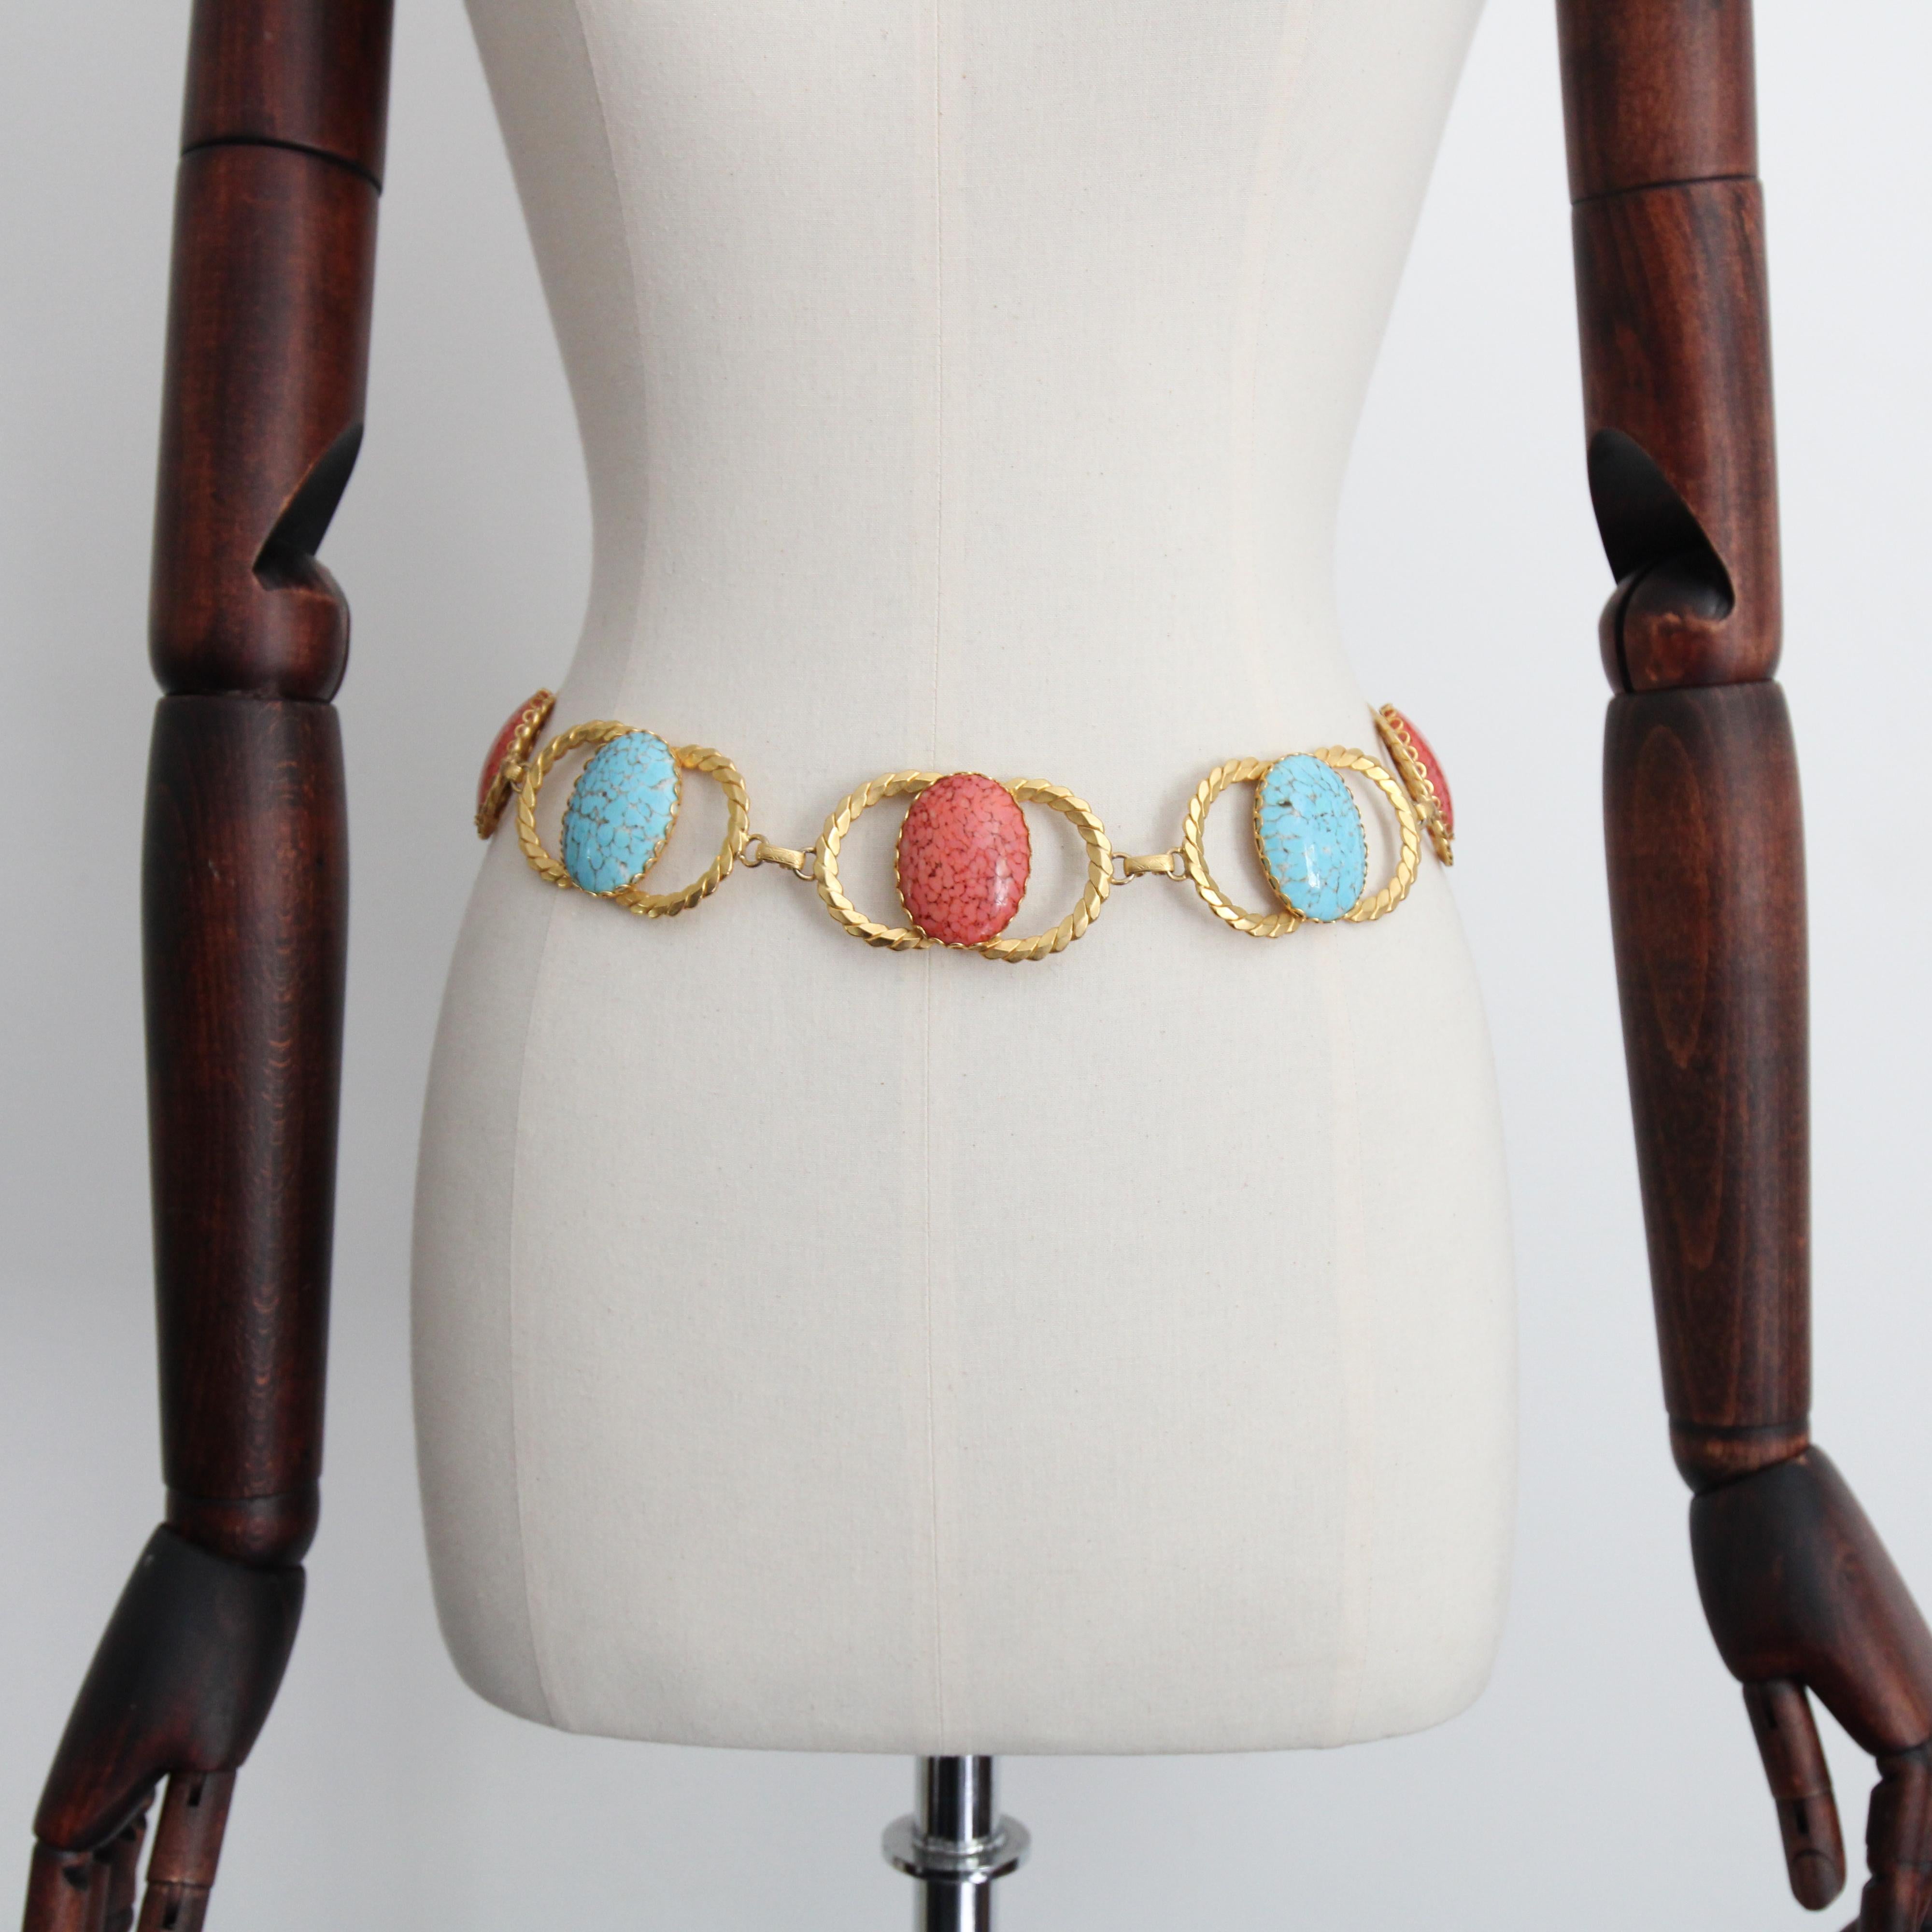 Women's or Men's Vintage 1970's coral and turquoise glass cabochons waist chain belt UK 8 US 4 For Sale